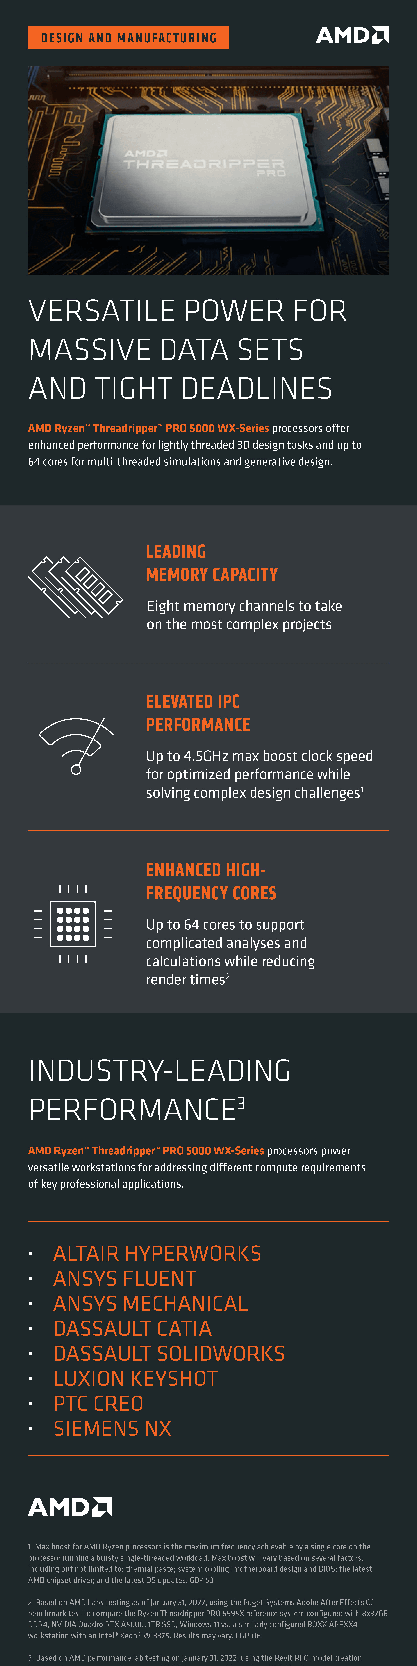 An infographic outlining the benefits of AMD Threadripper PRO processors for design and manufacturing.